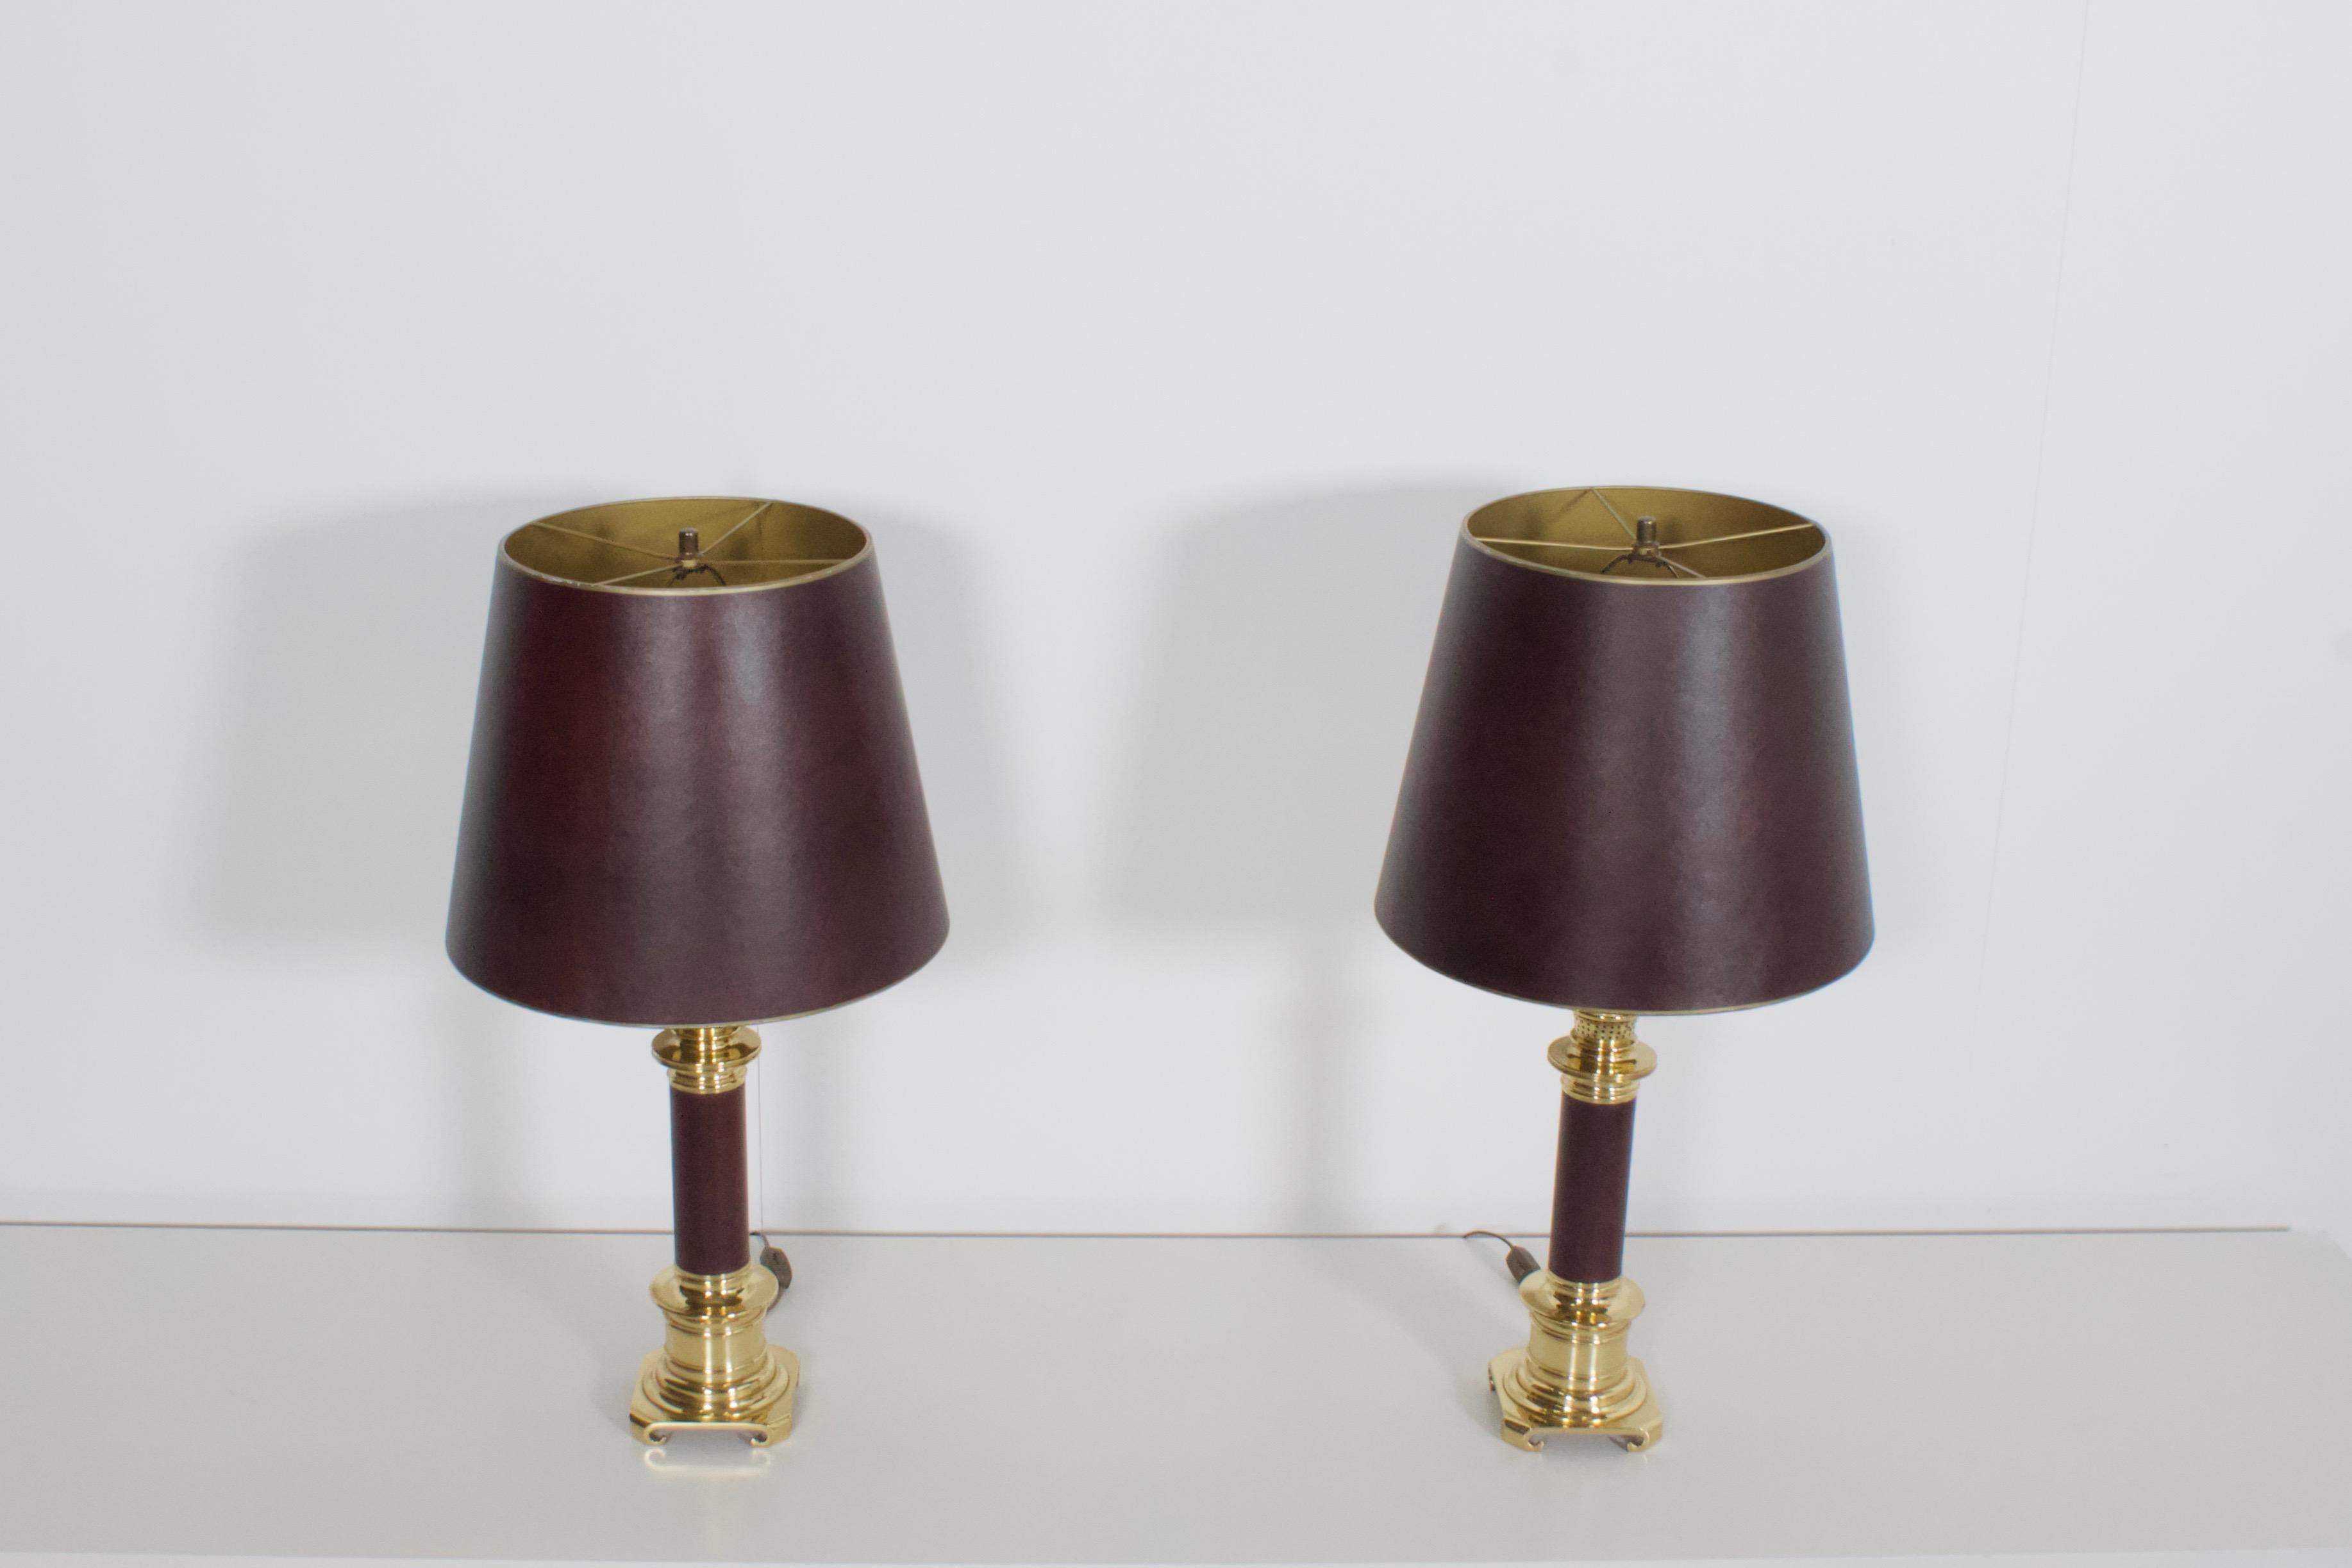 High quality neoclassical table lamps in very good condition.

Manufactured by Maison Jansen, France, 1970s

Heavy solid brass wrapped in a burgundy natural leather

The shades are also made in burgundy leather and they are gold on the